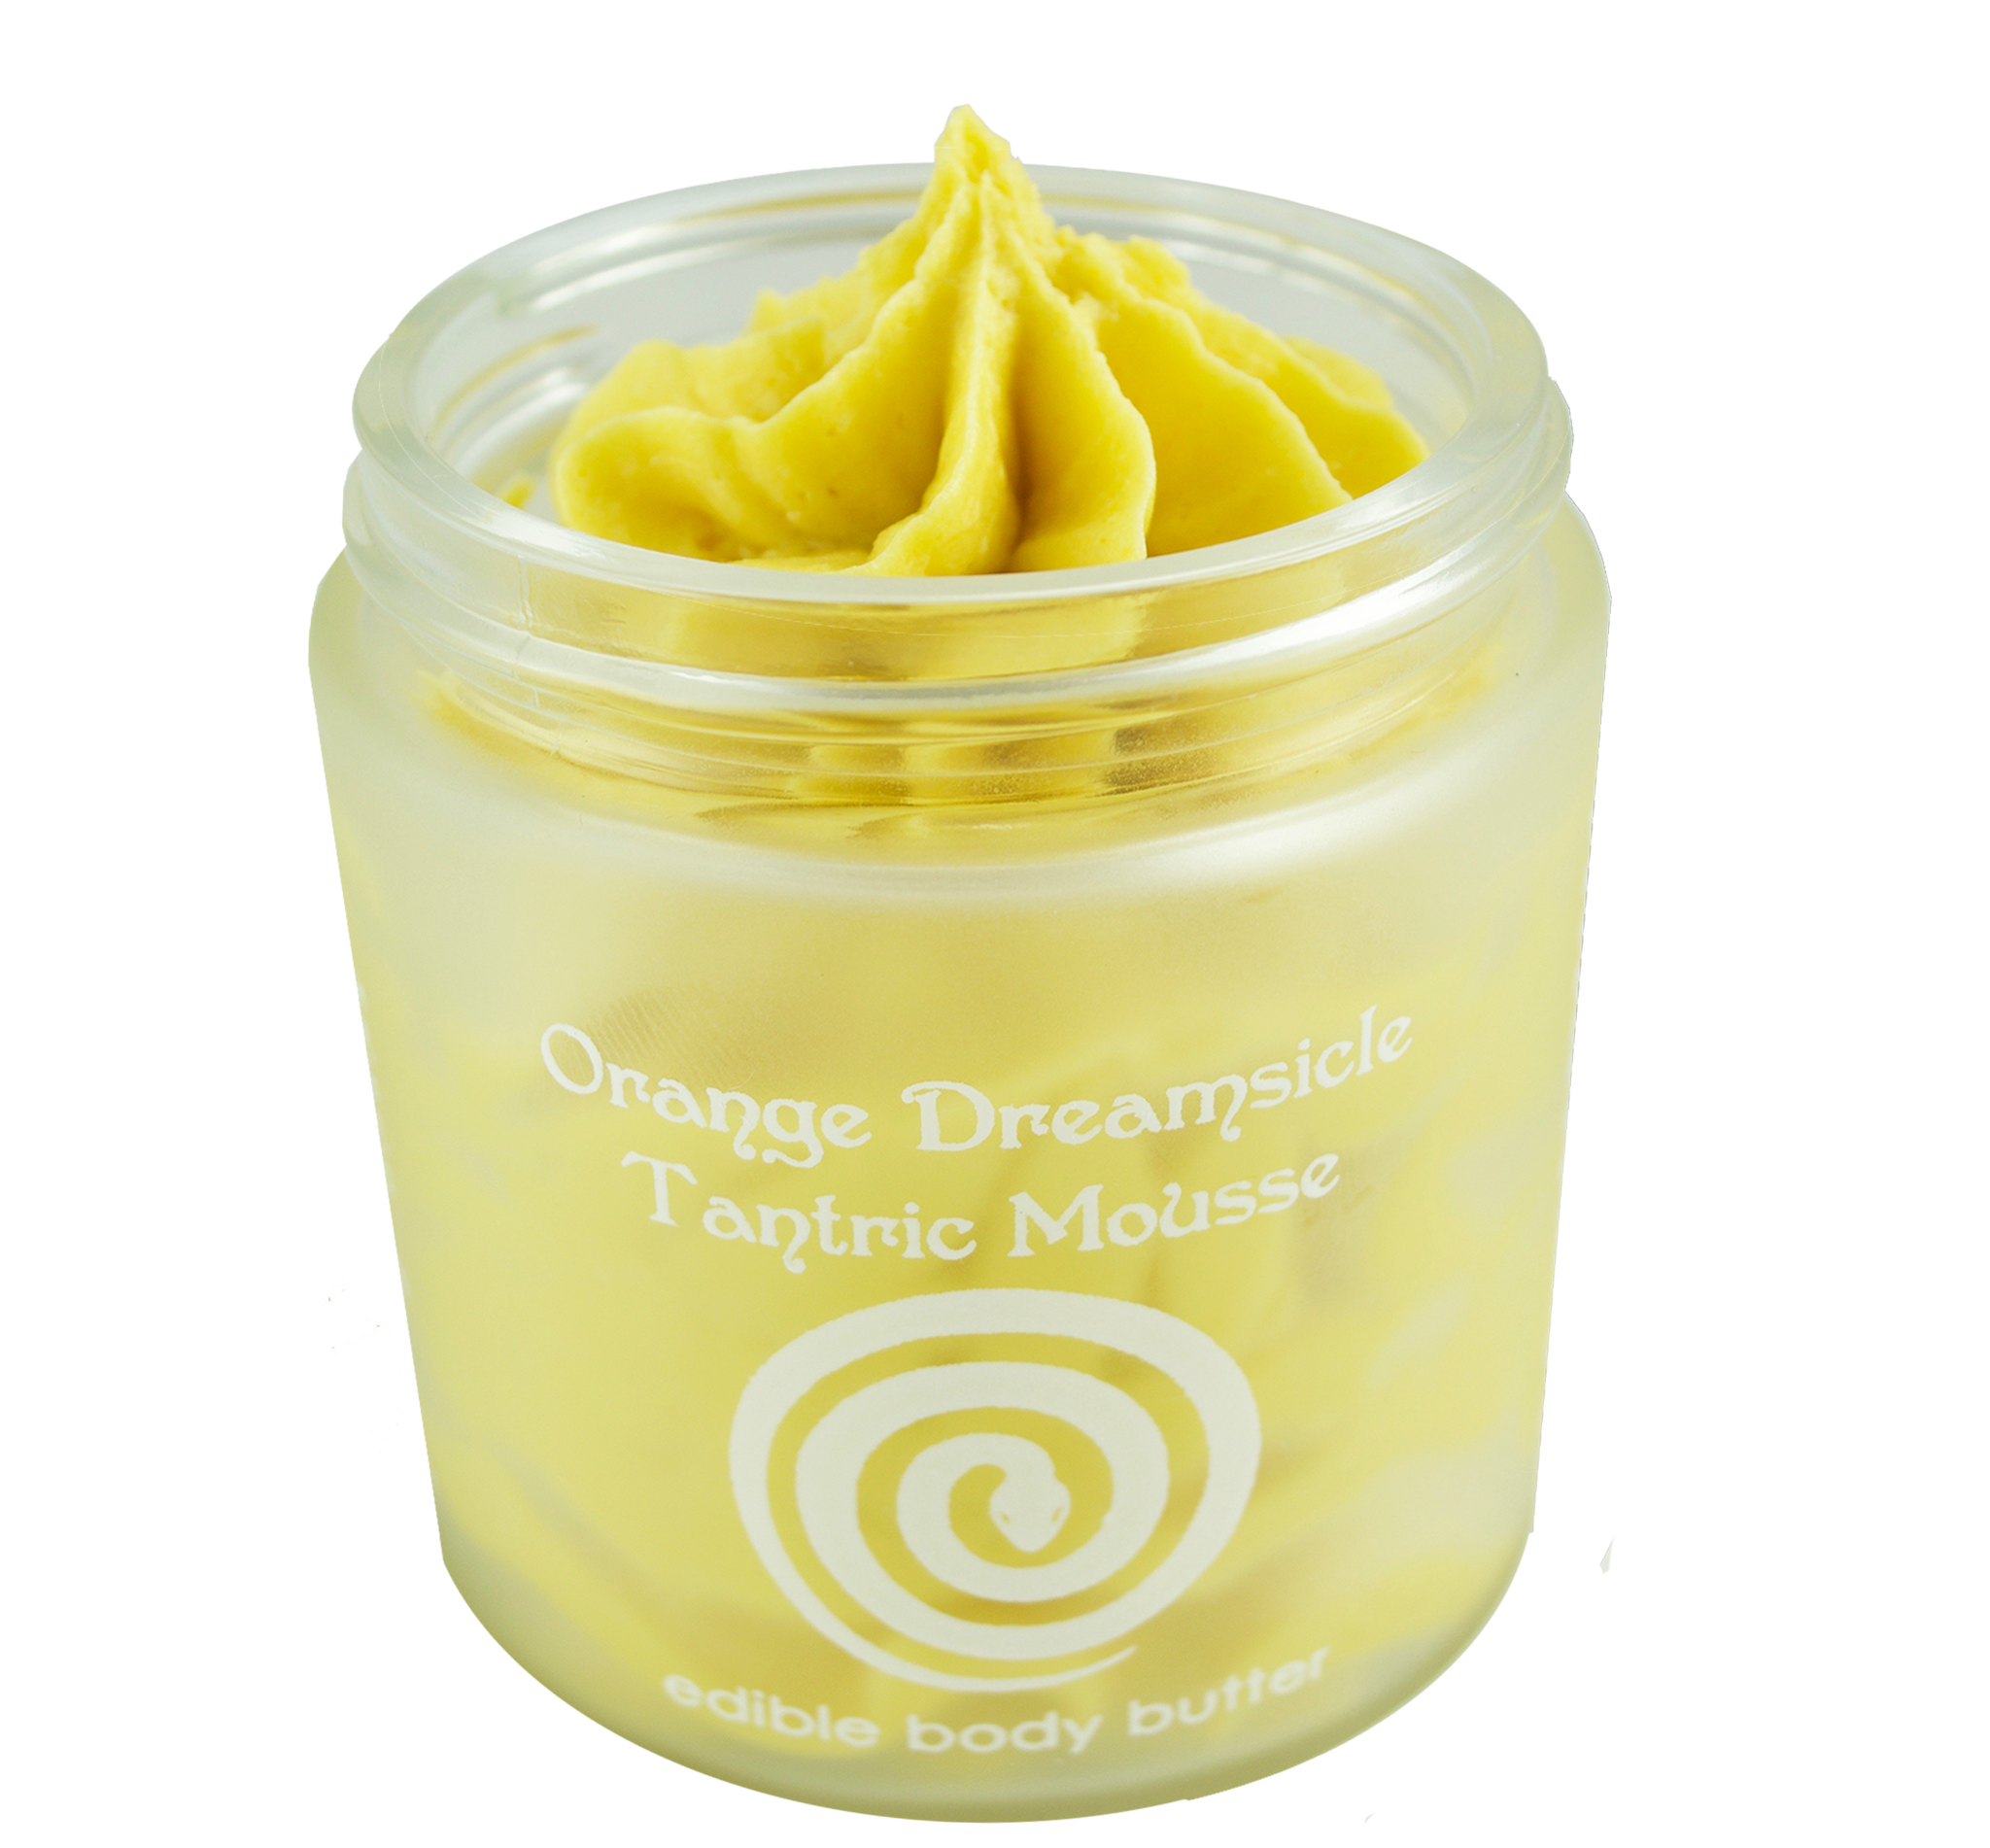 Tantric Mousse ~ orange dreamsicle organic body butter